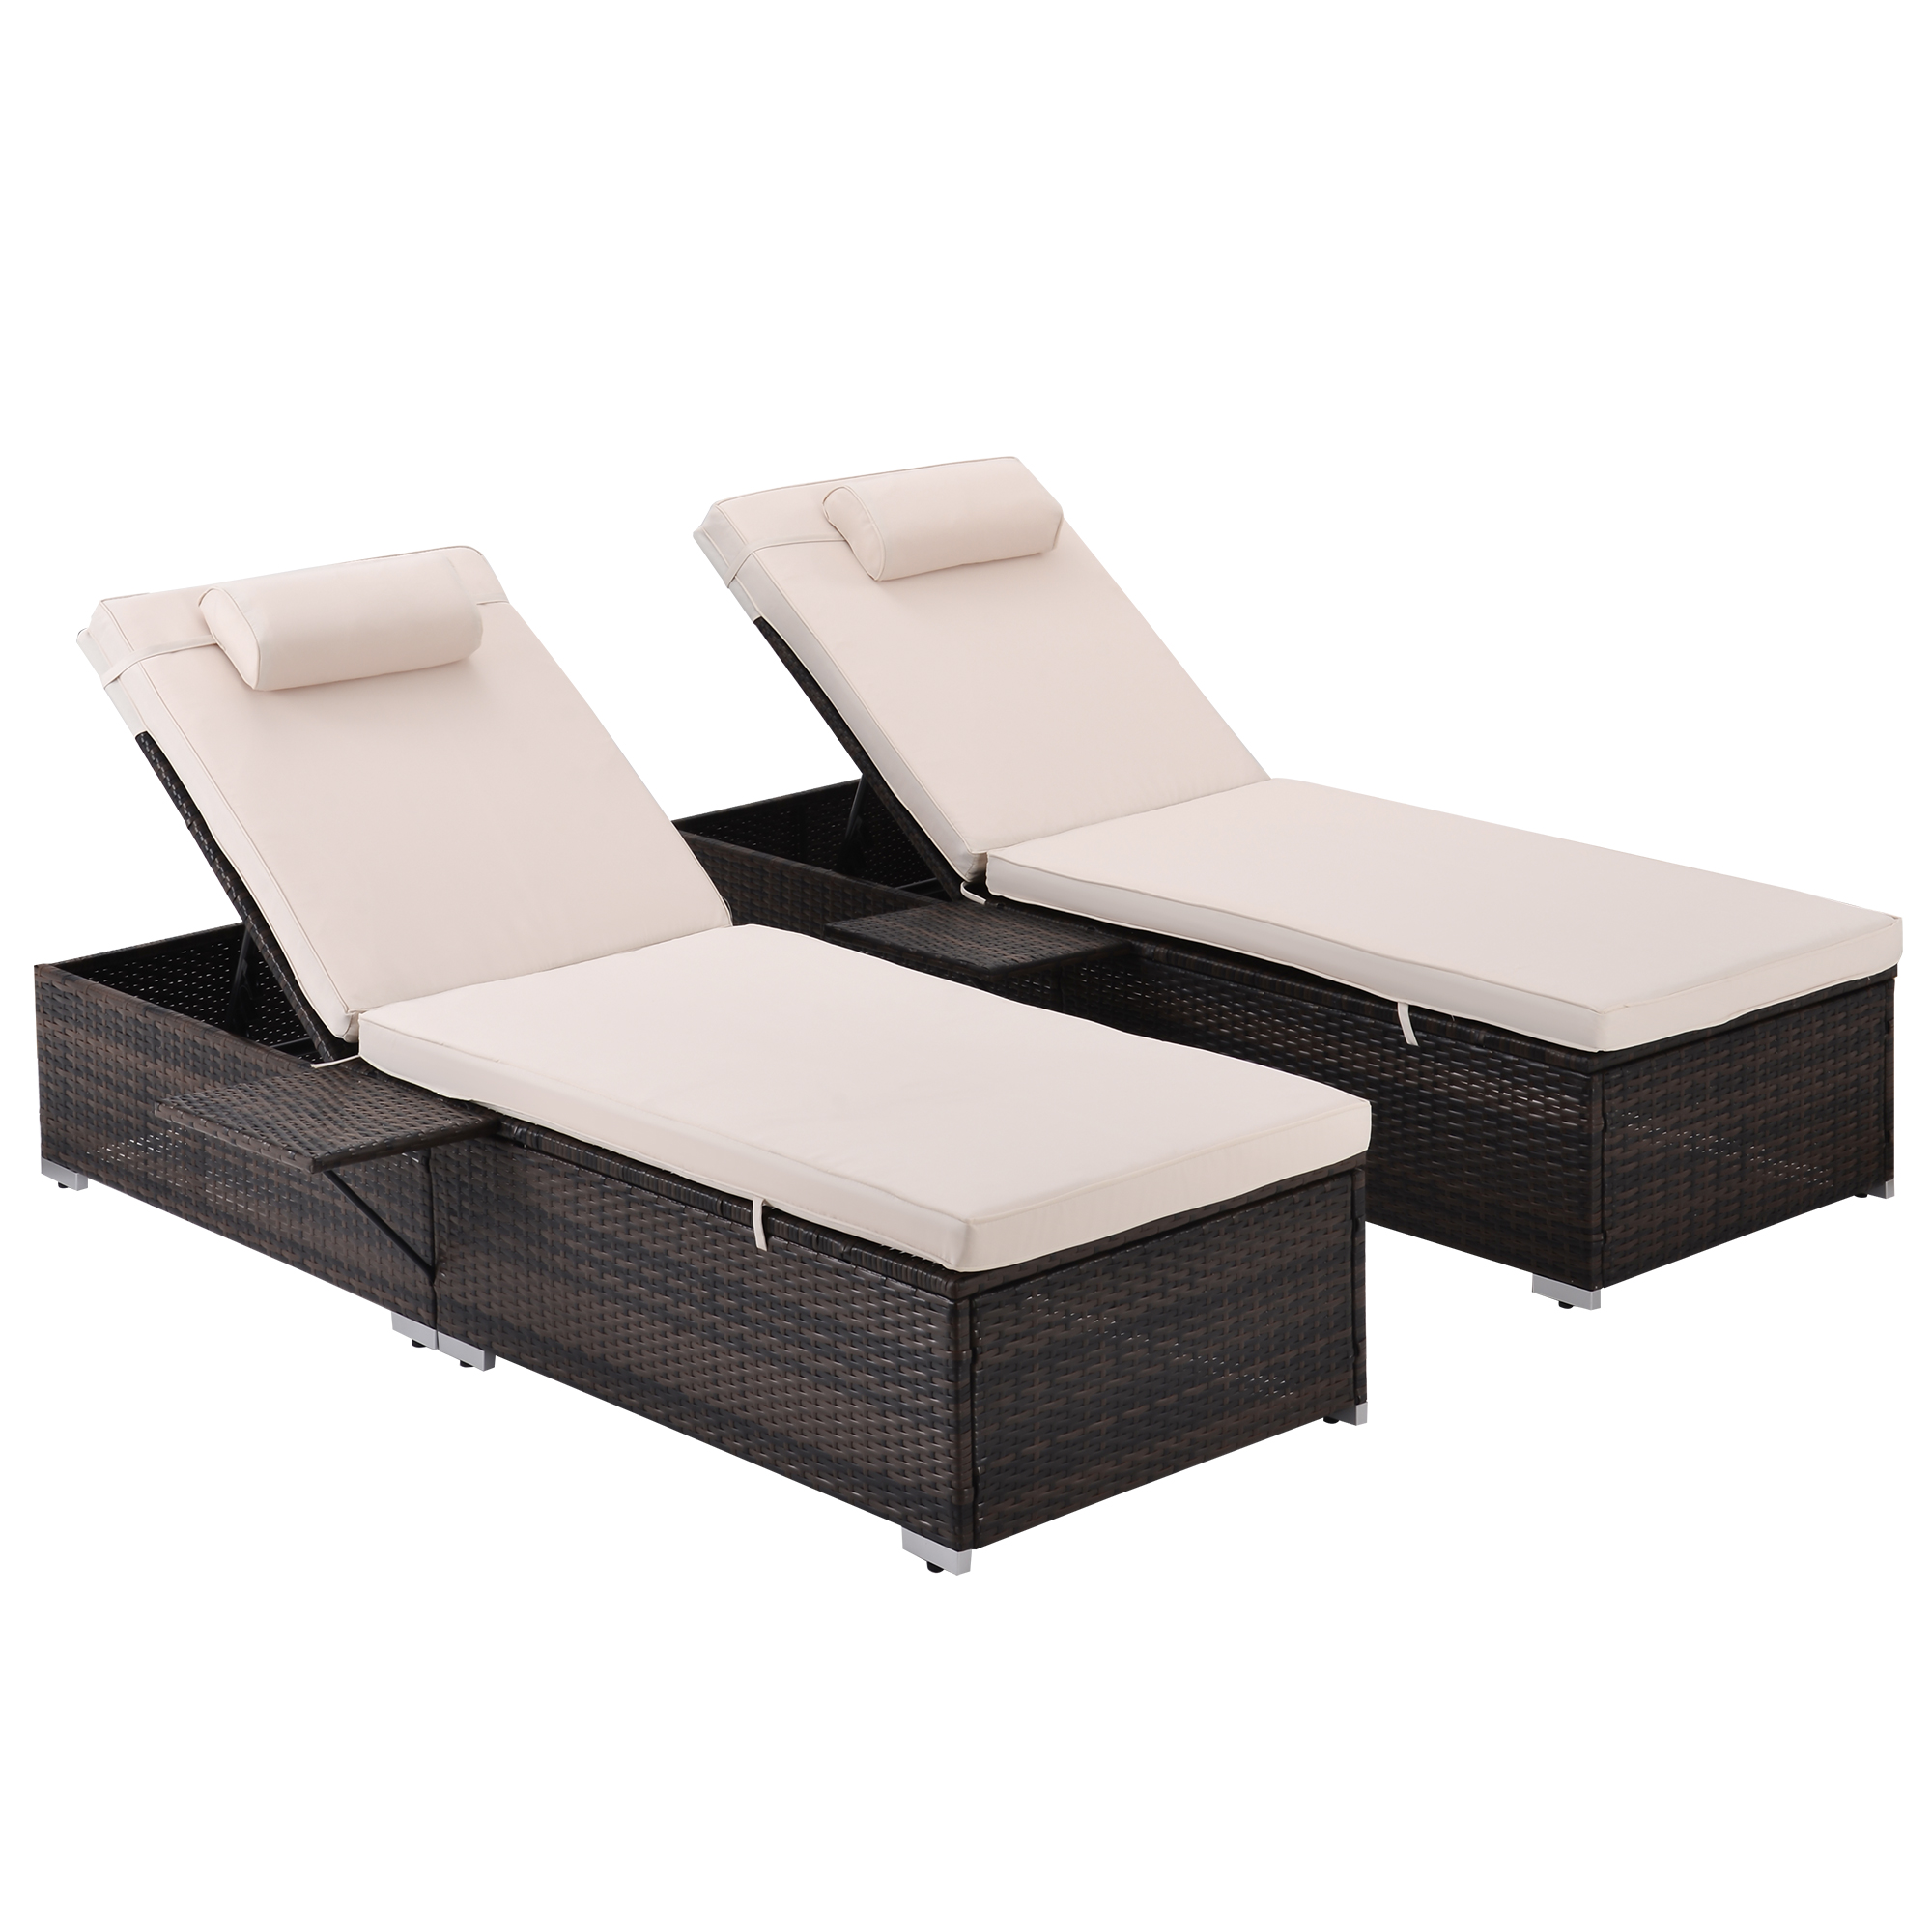 Chaise Lounge Chairs for Outside 2 Pieces, Patio Adjustable Lounge Chairs Set of 2 with Side Table, Outdoor Rattan Wicker Pool Chaise Lounge Chairs Cushioned Poolside Chaise Lounge Set, Beige - image 5 of 10